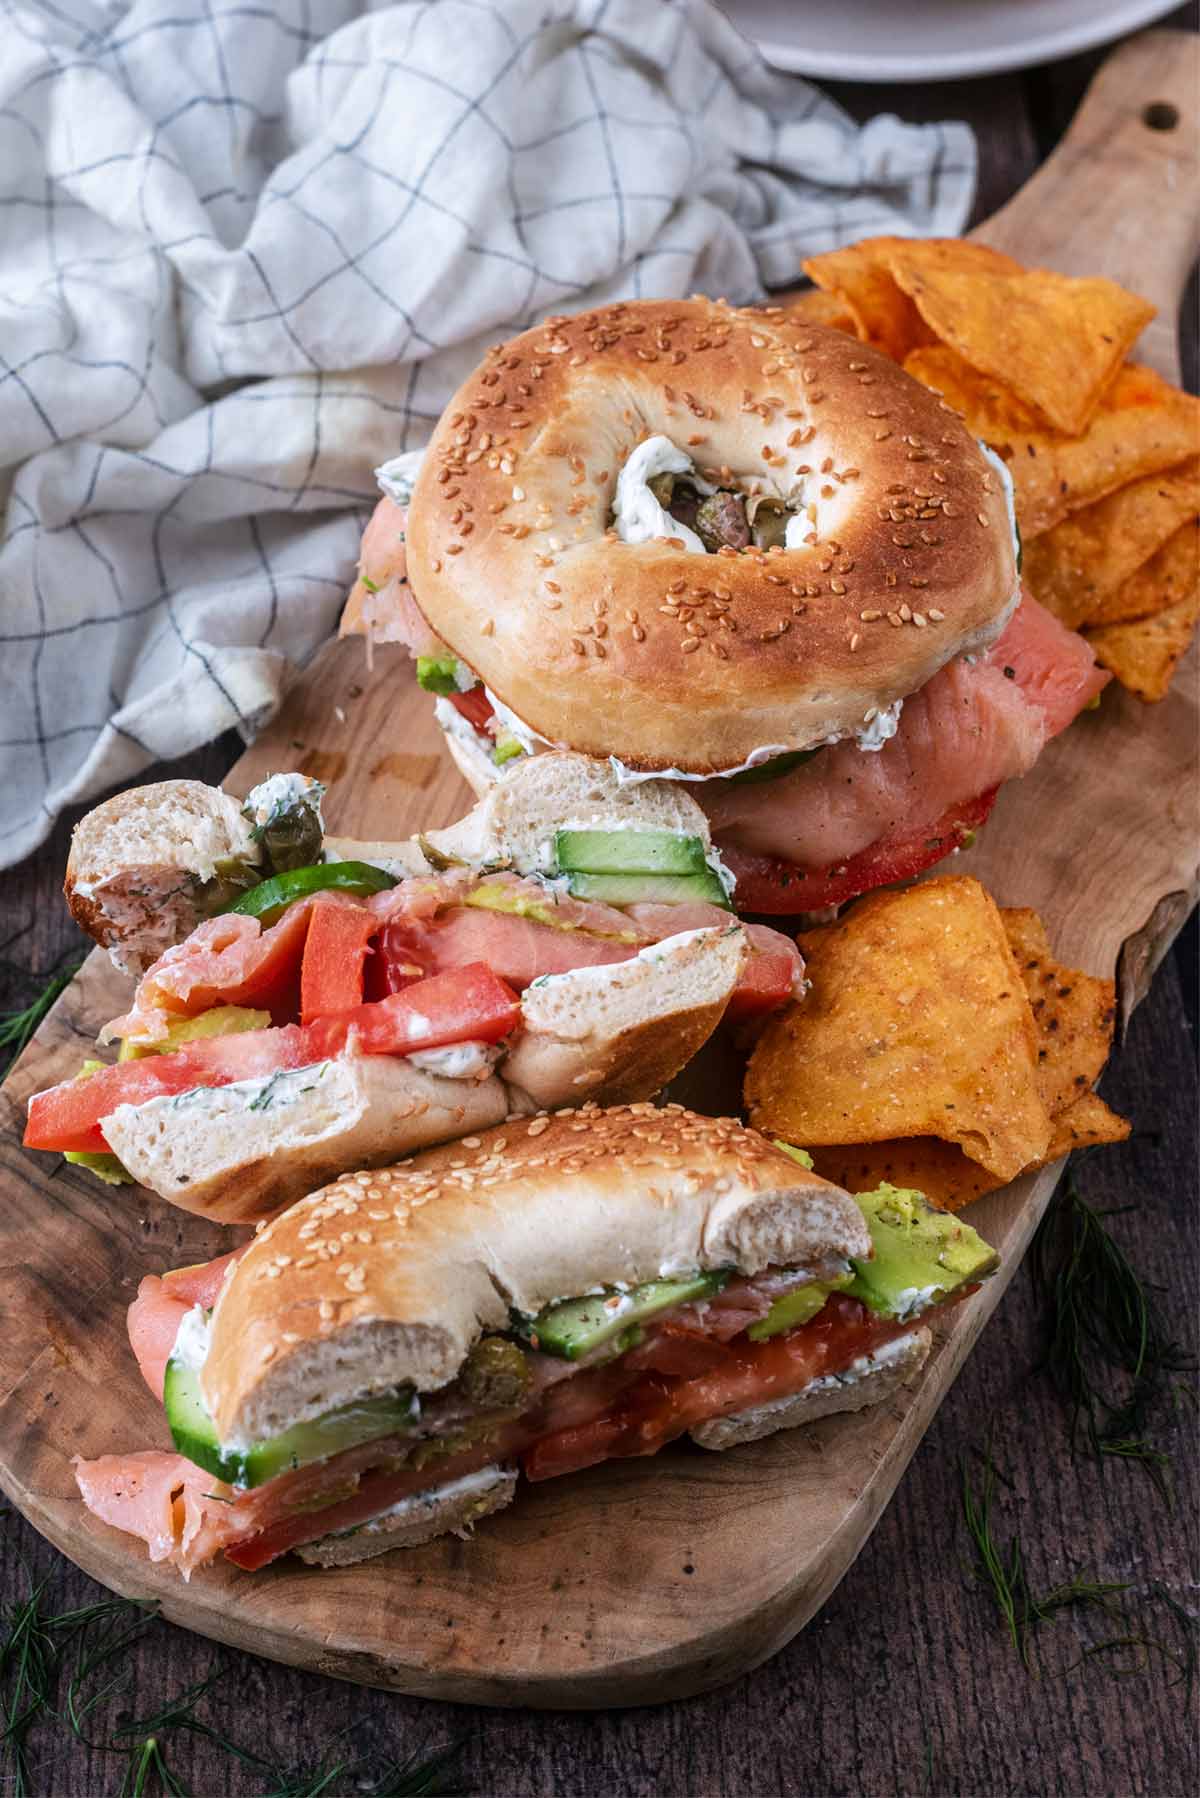 Two filled bagels on a wooden board, one is cut in half.